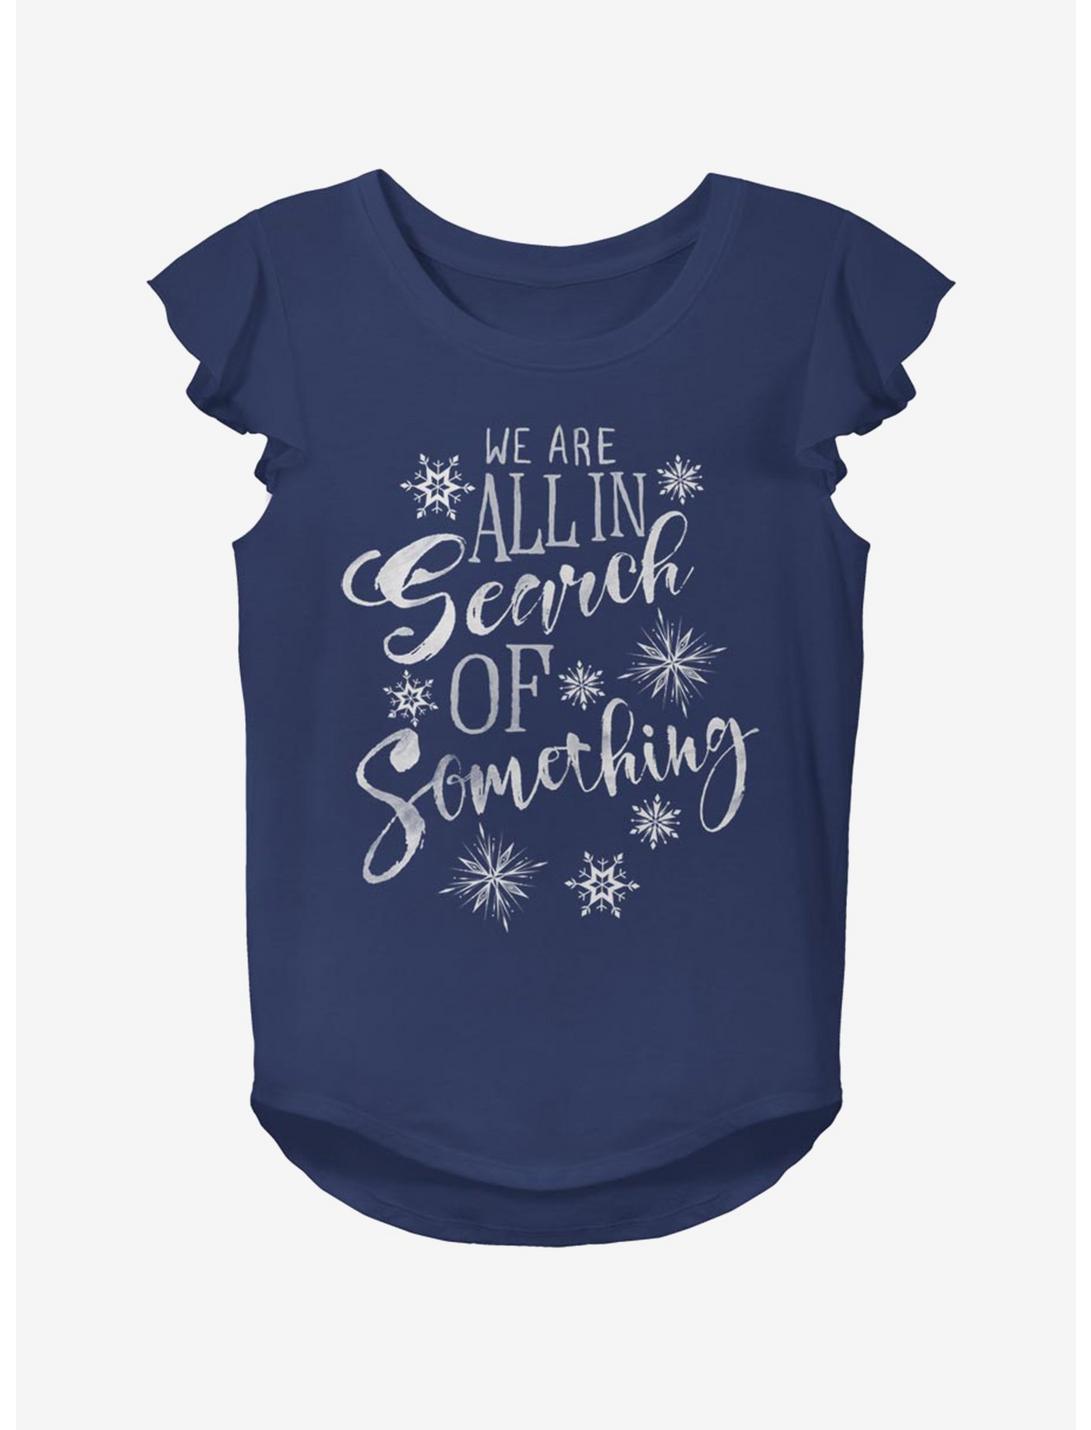 Disney Frozen 2 In Search Of Something Youth Girls Flutter Sleeve T-Shirt, NAVY, hi-res